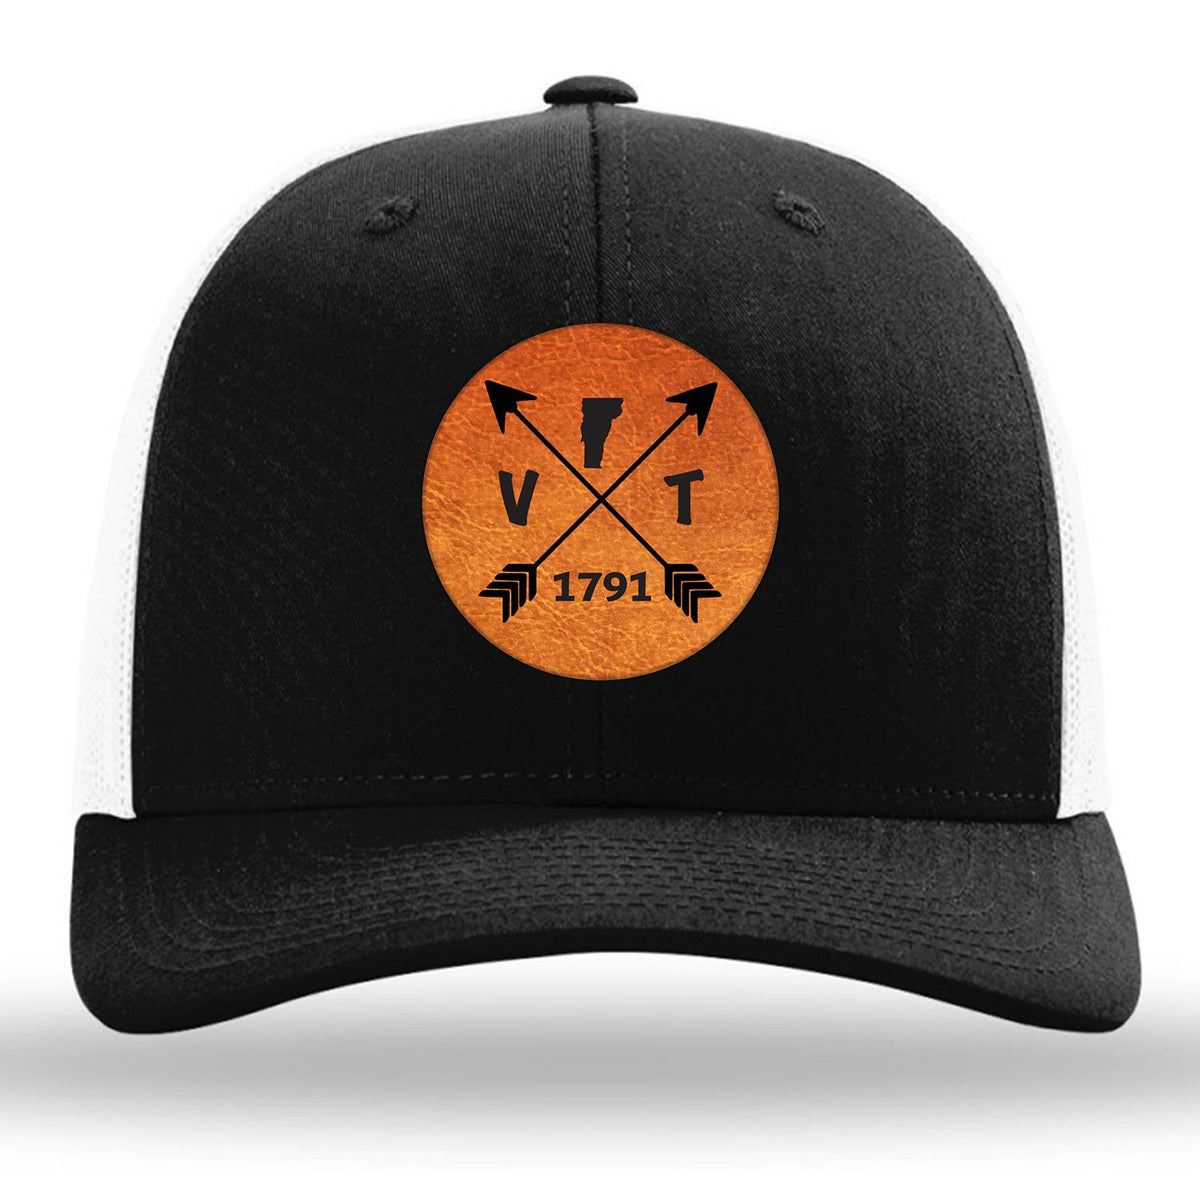 Vermont State Arrows - Leather Patch Trucker Hat